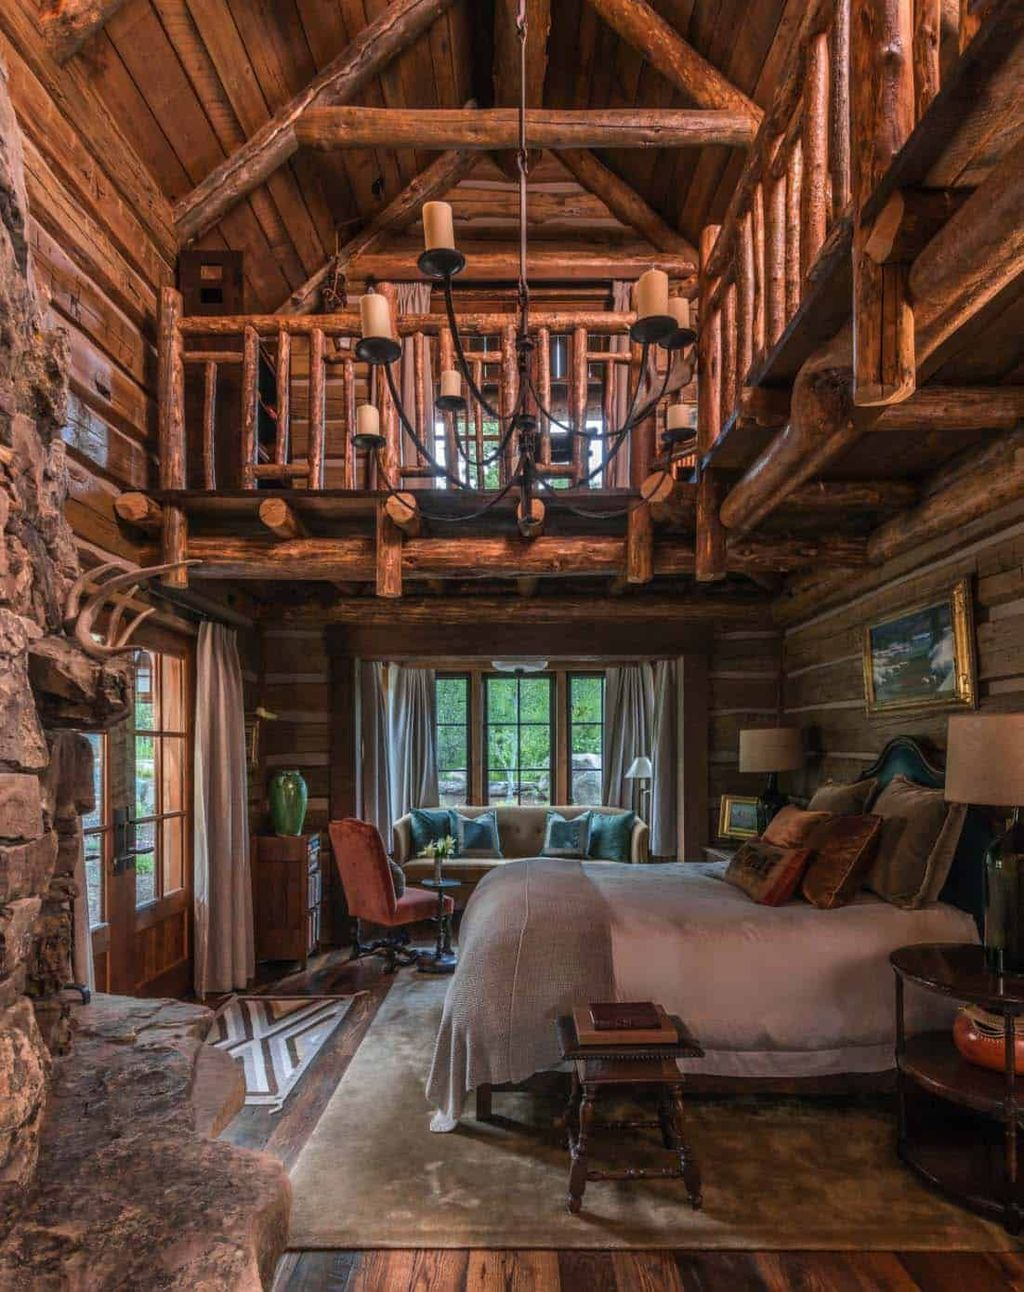 Gorgeous Log Cabin Style Home Interior Design23